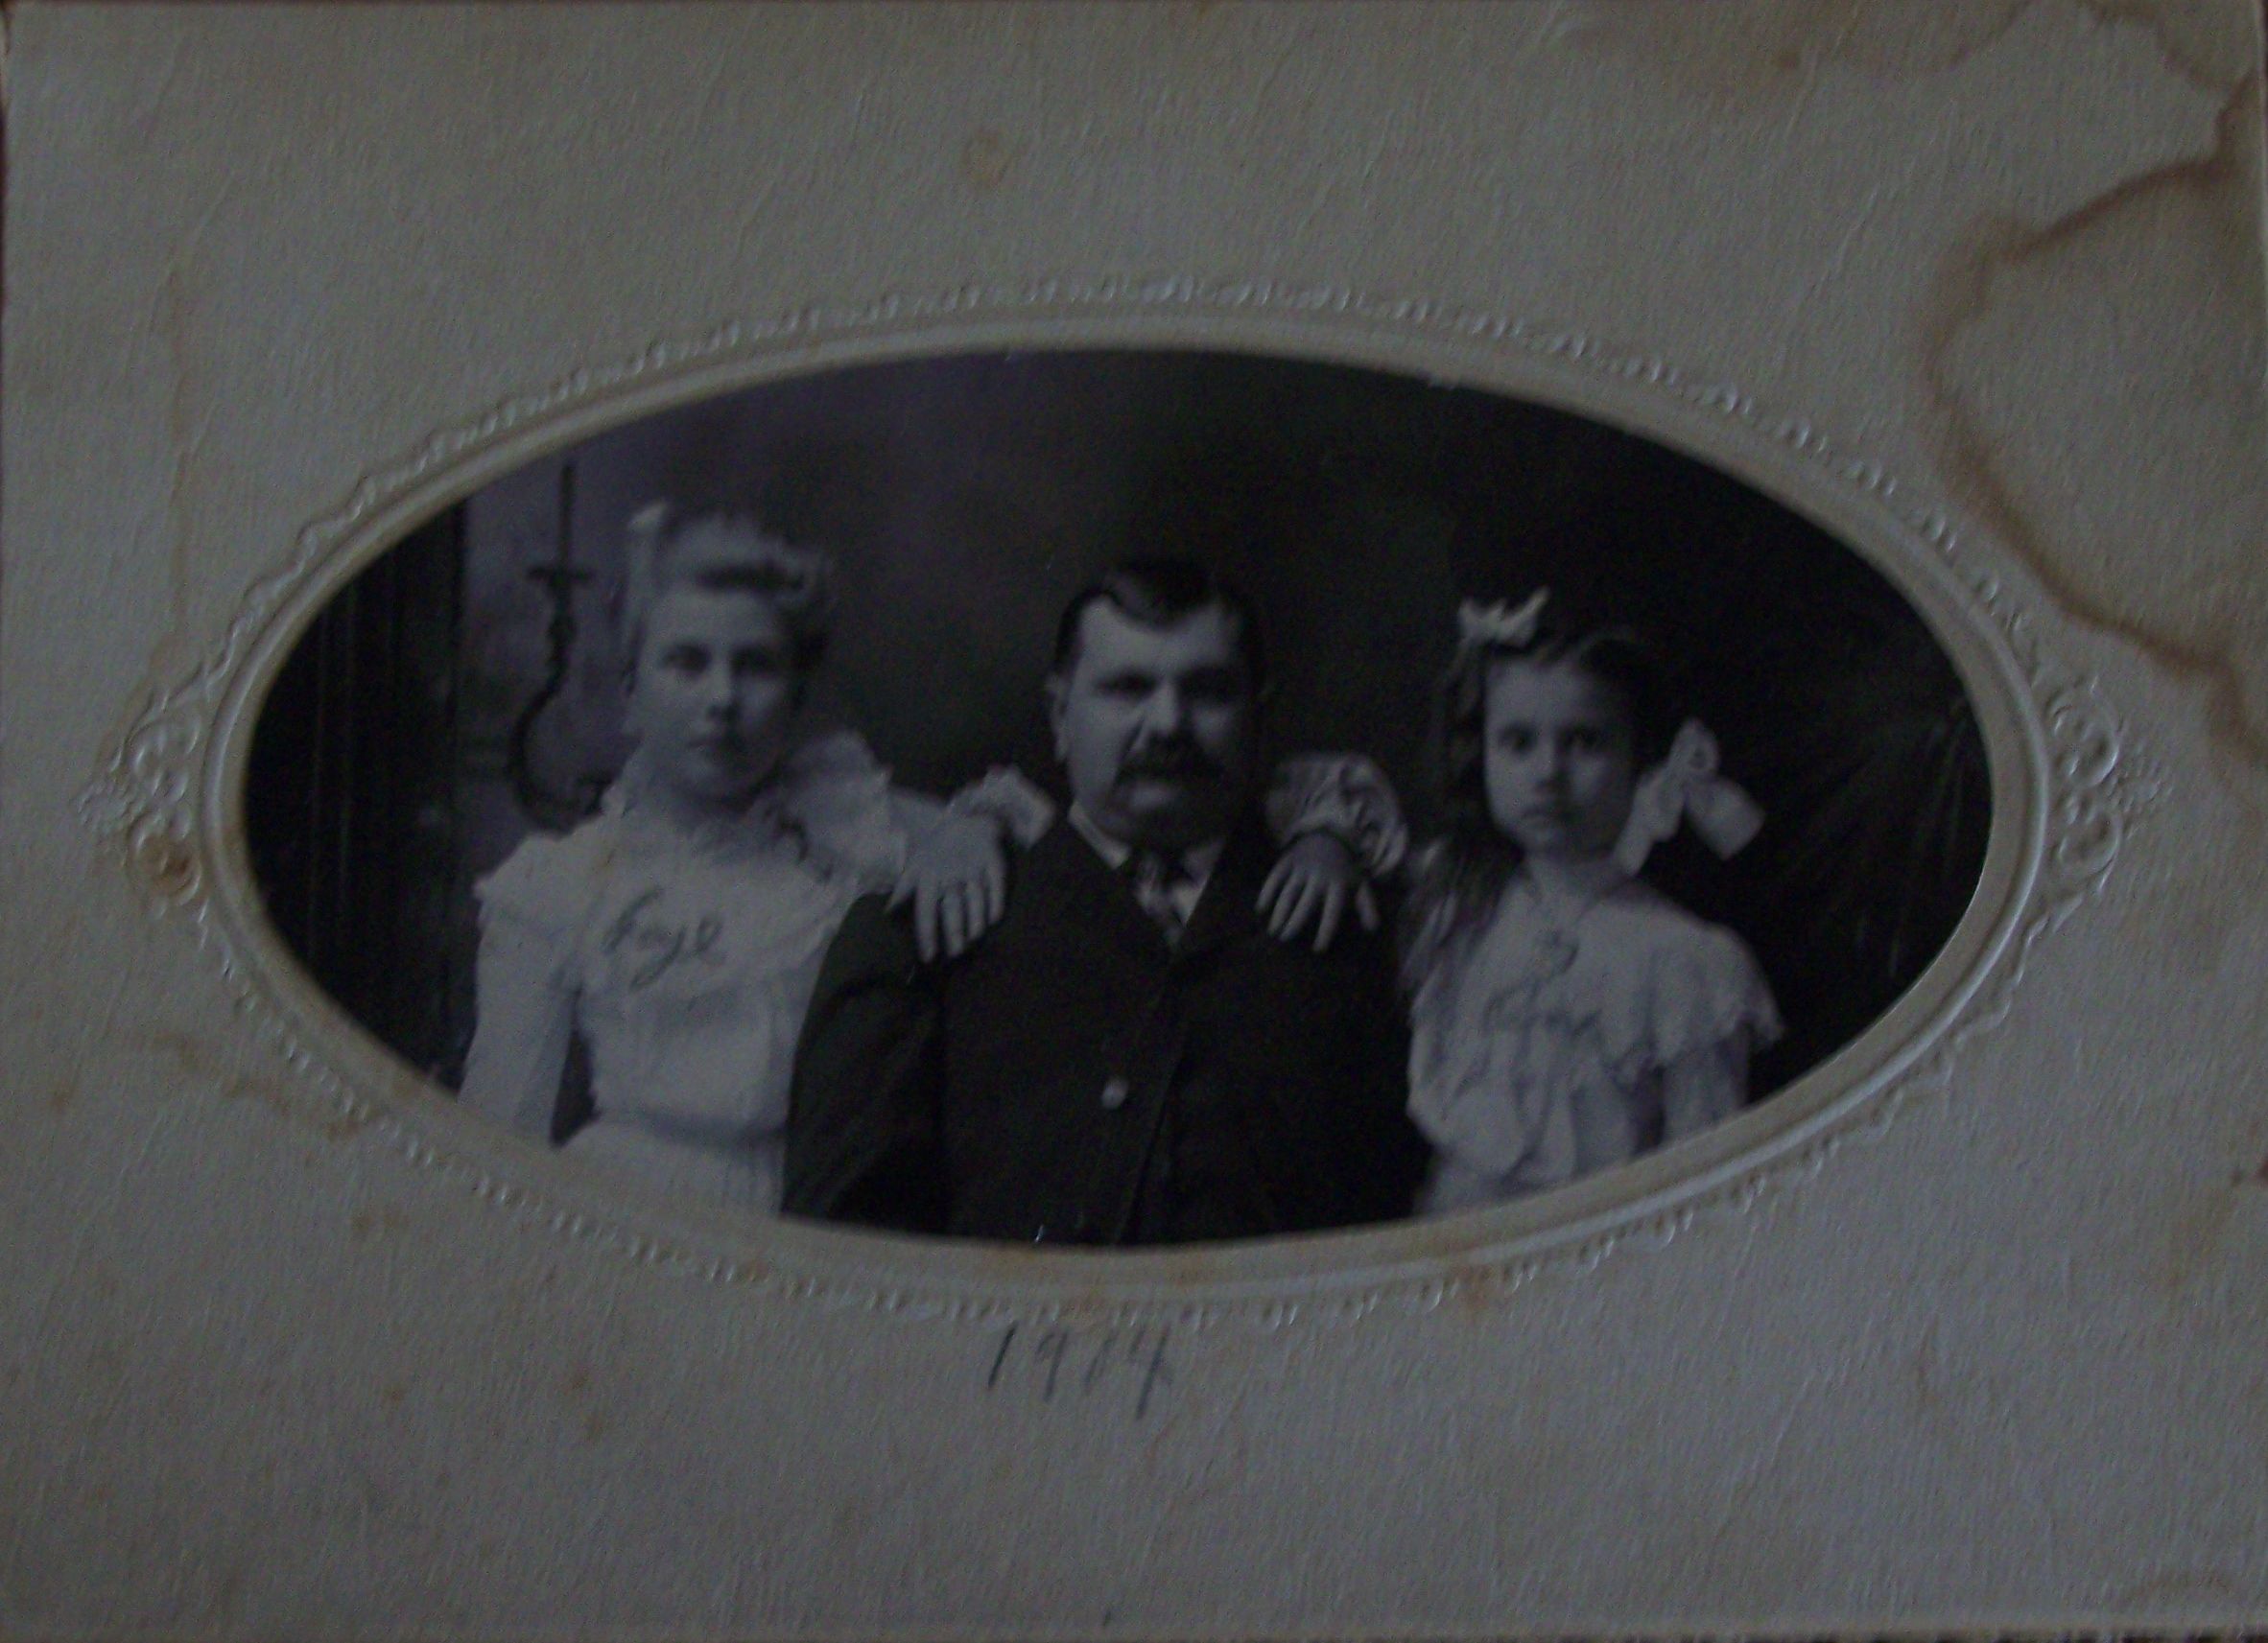 Portrait of Fay (12), Henry (father), and Ona (8) Fritz, dated 20 June 1904